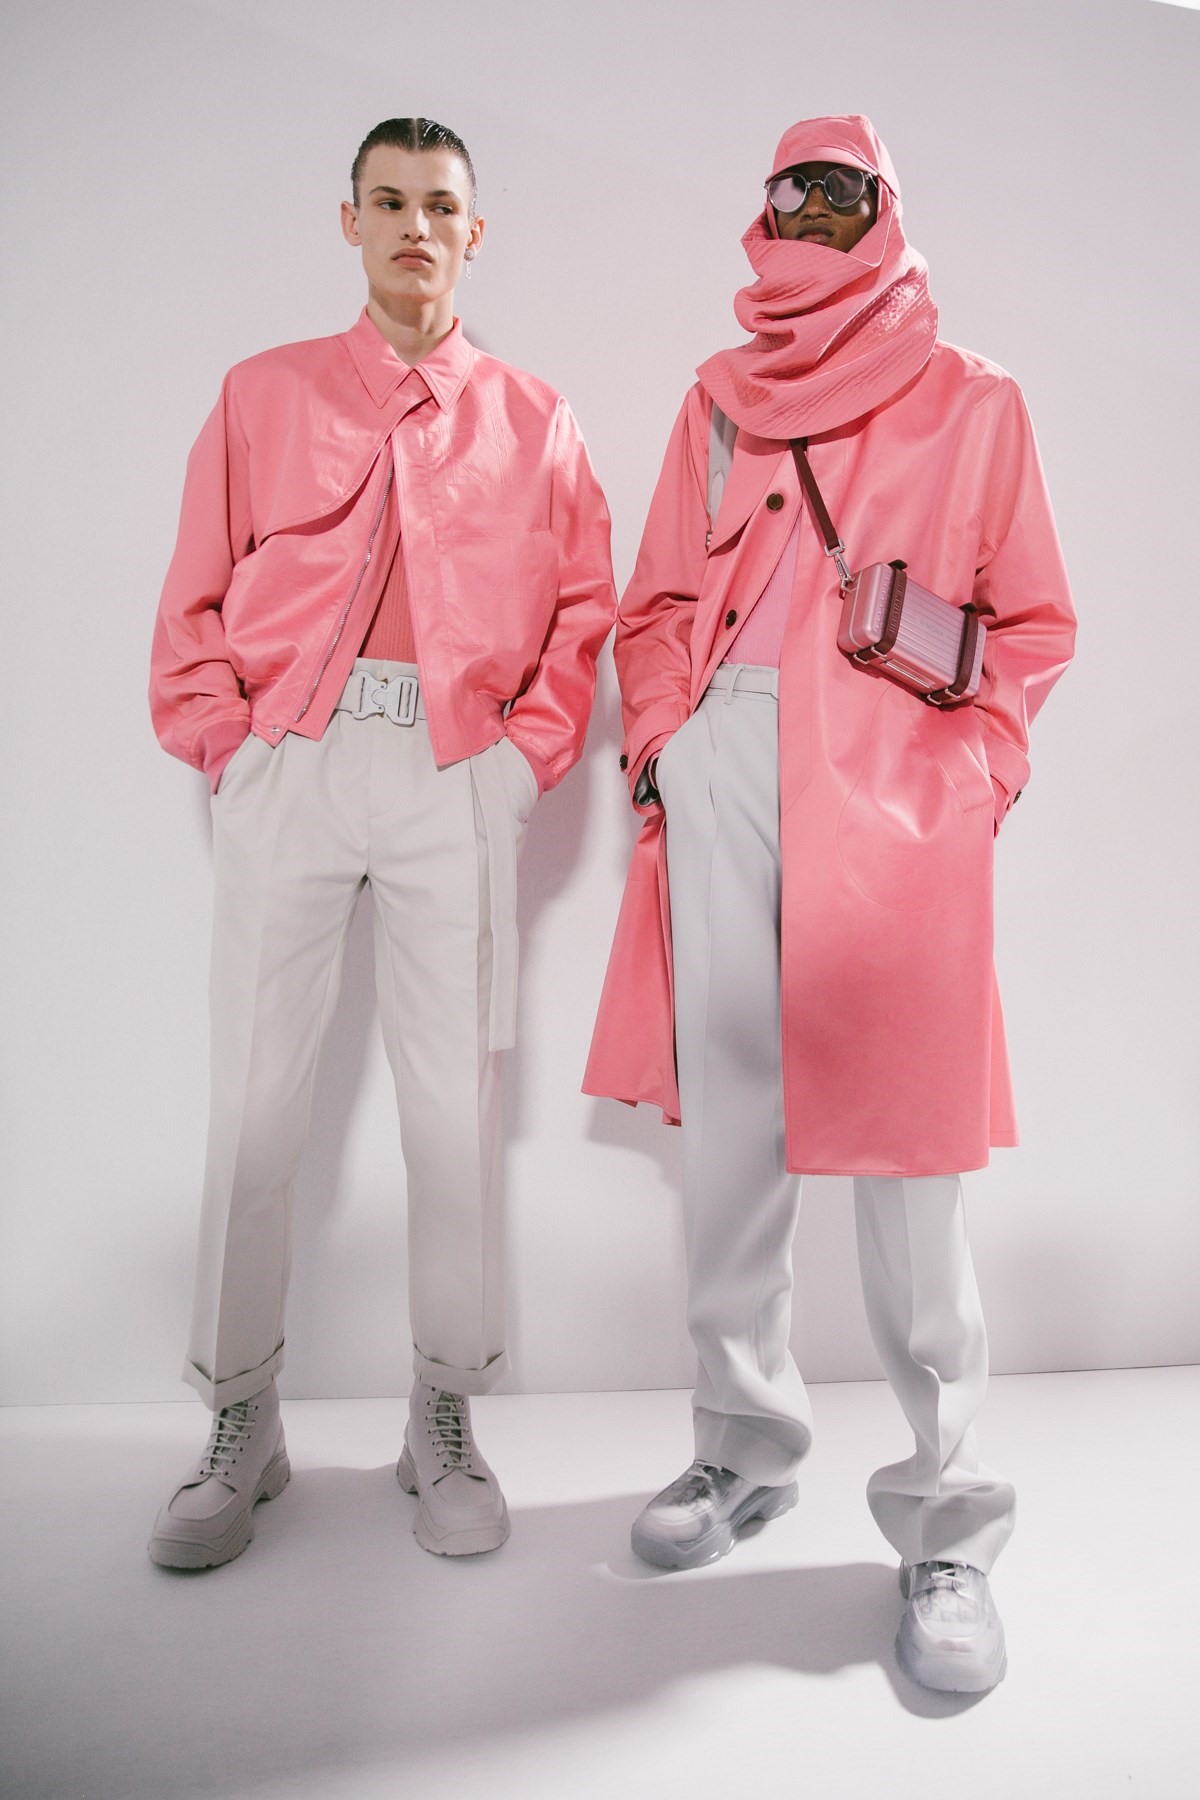 Dior's Kim Jones SS20 show is in the pink of condition